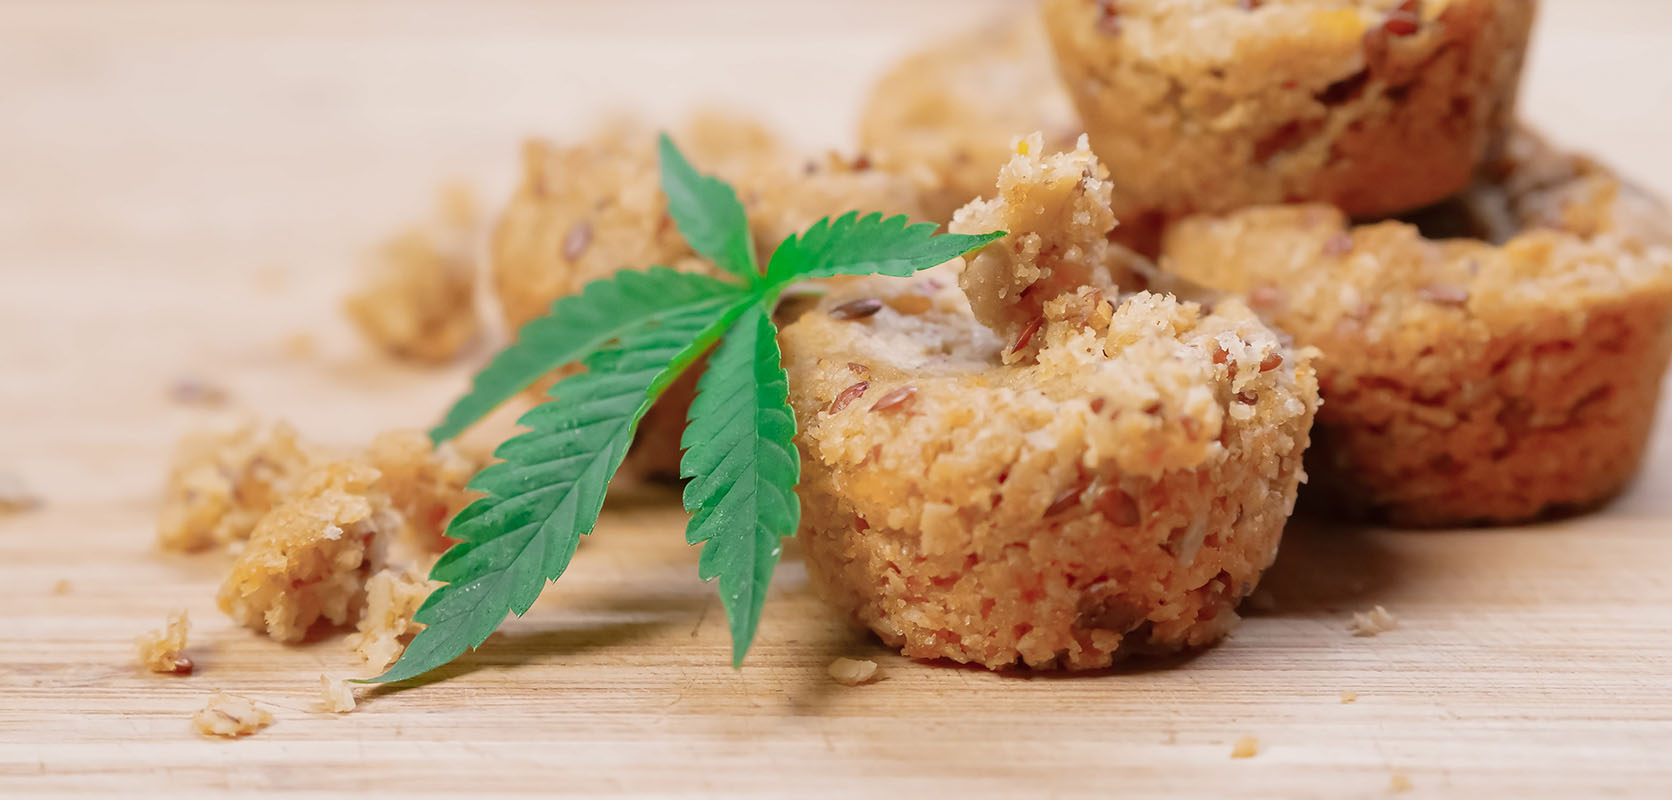 Sativa edibles with a cannabis leaf. Buy the best sativa edibles from online weed dispensary Low Price Bud. Indica edibles also.